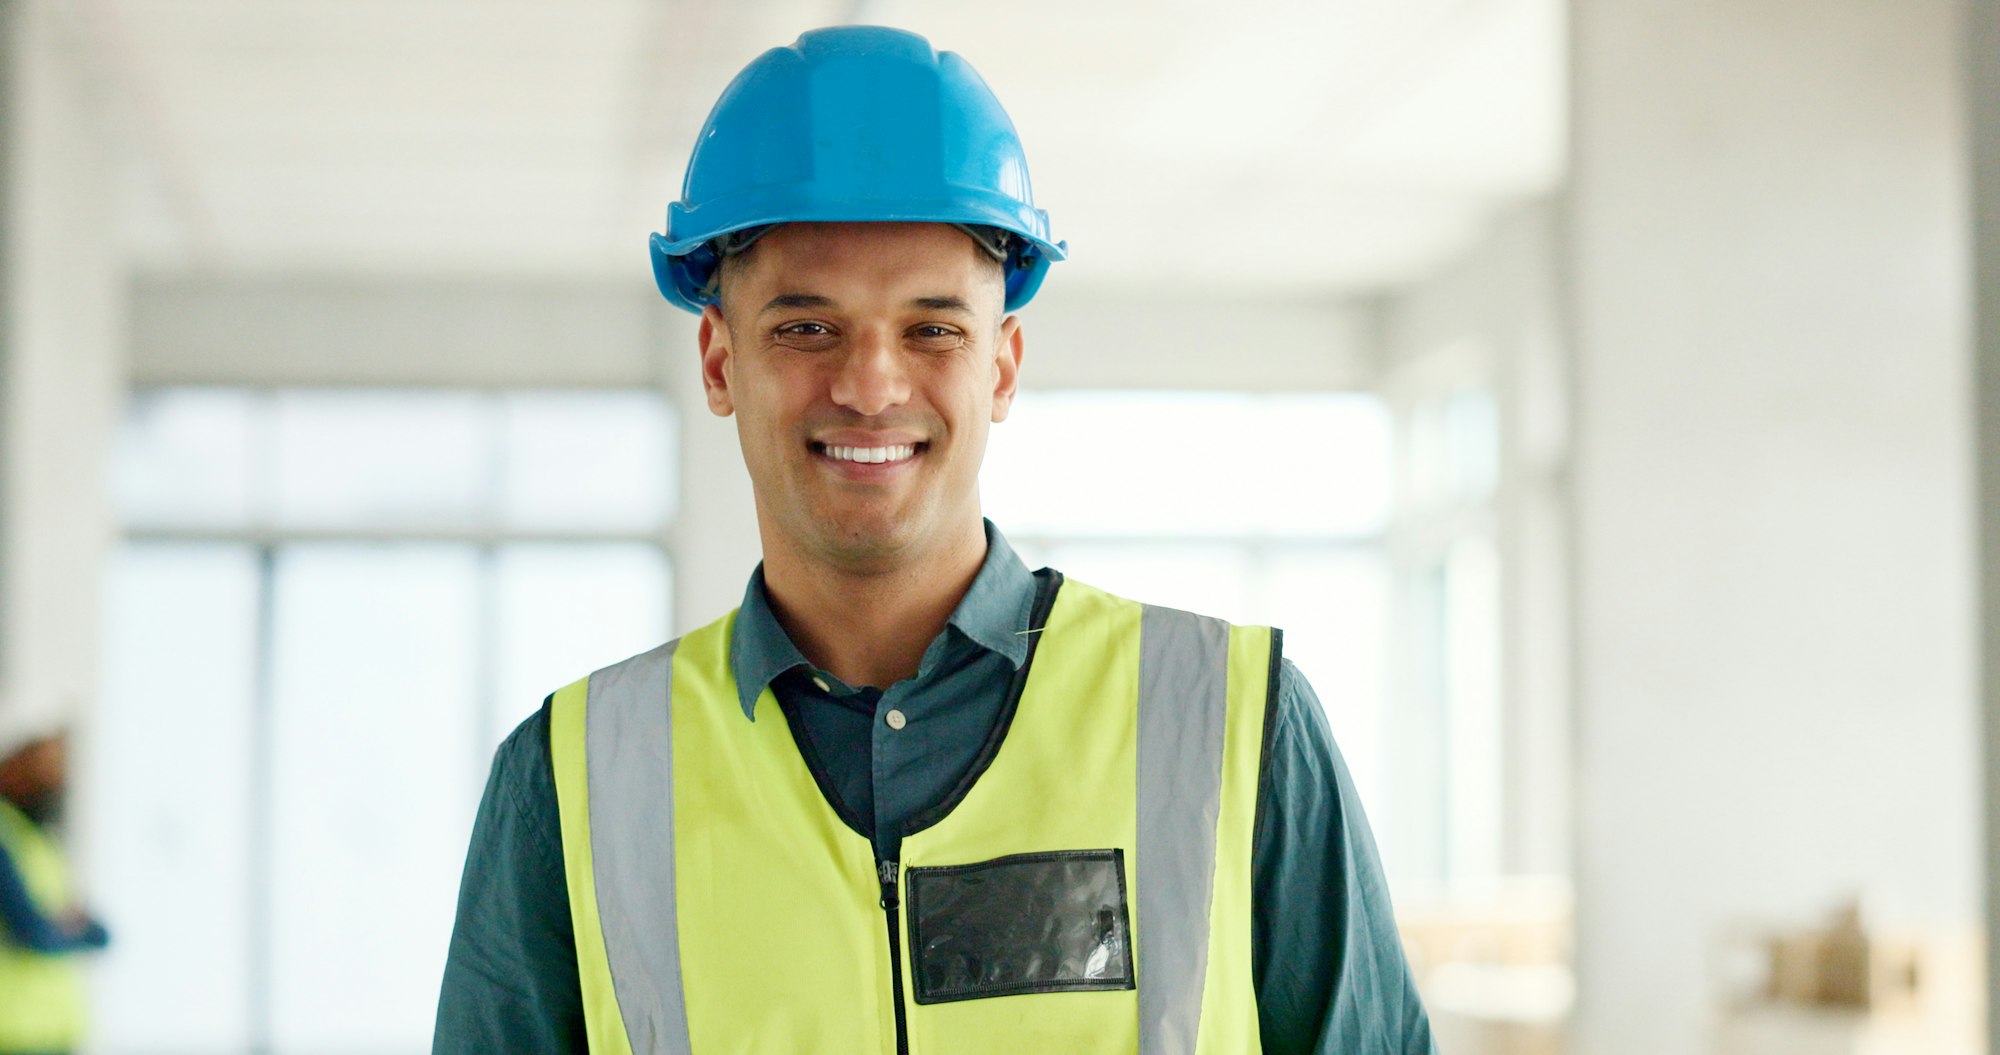 Construction, building and construction worker, man and smile in portrait, employee at construction